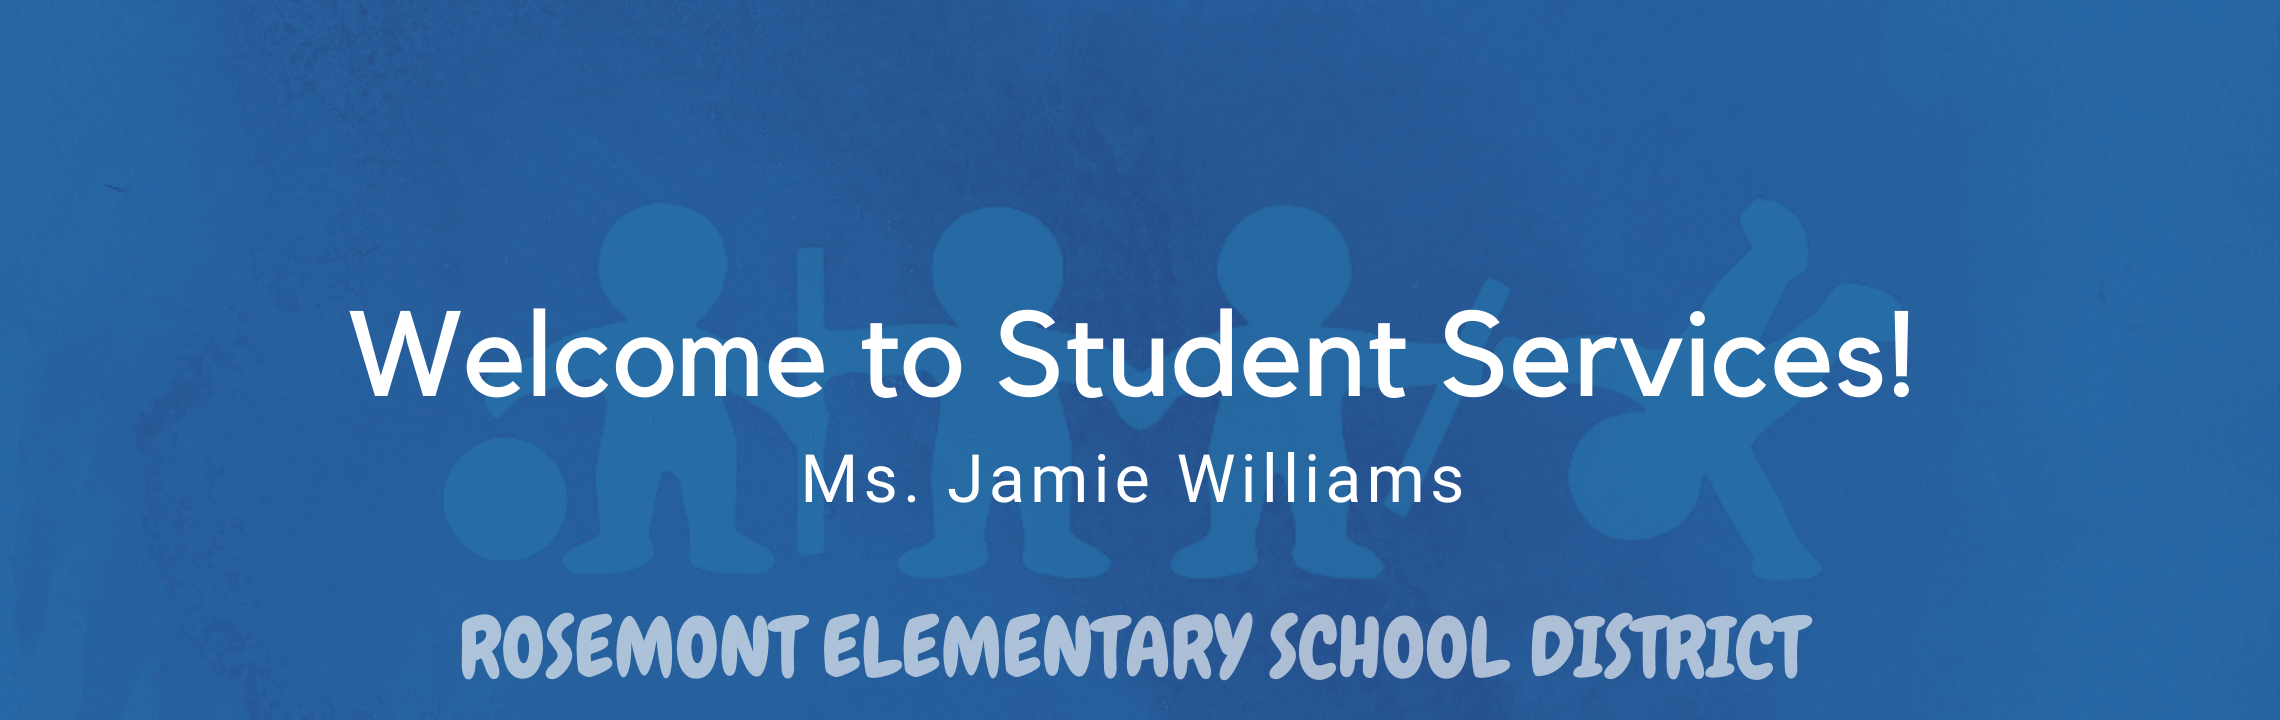 Welcome to Student Services! Ms. Jamie Williams, Rosemont Elementary Schools 